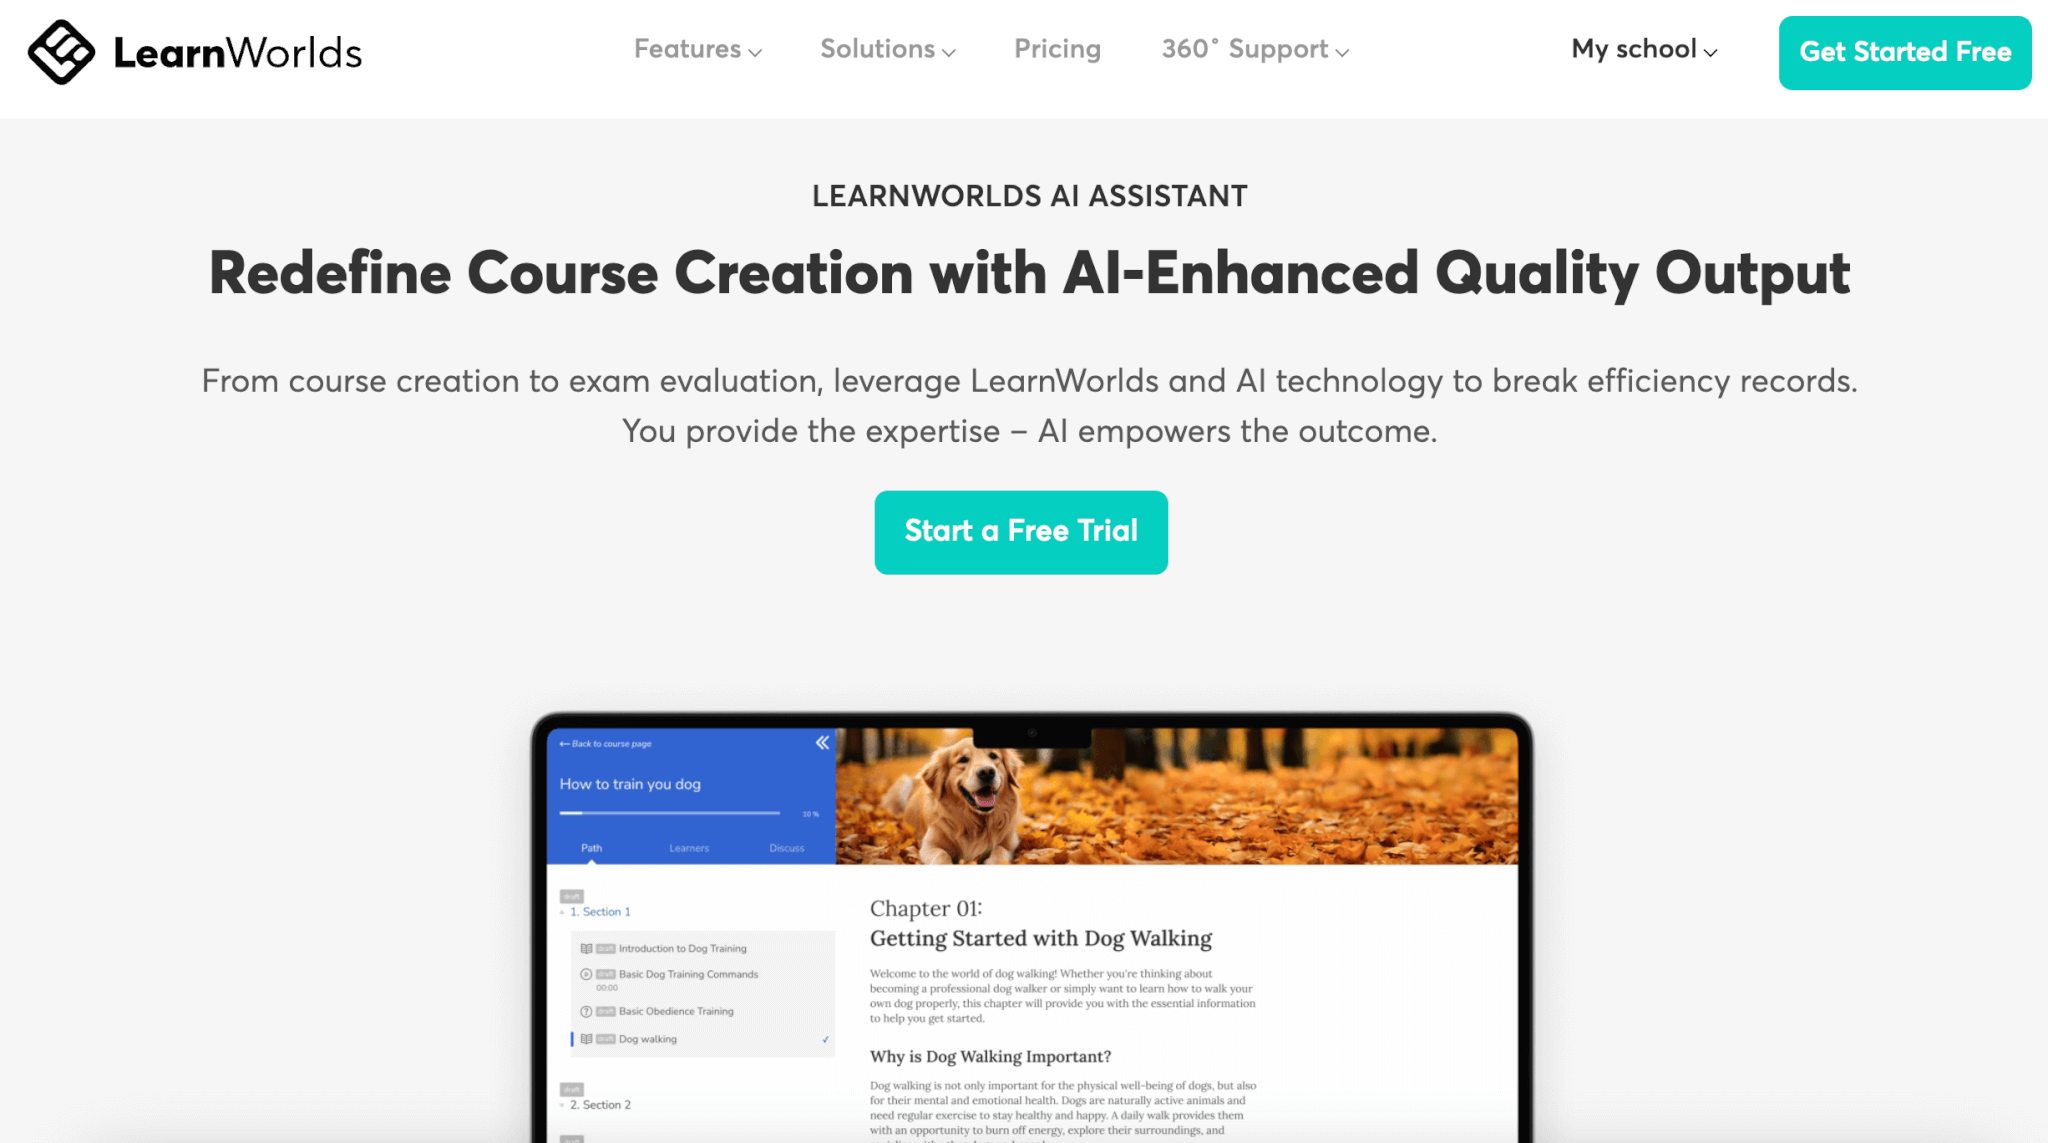 a screenshot of the LearnWorlds landing page showing a course outline created with AI